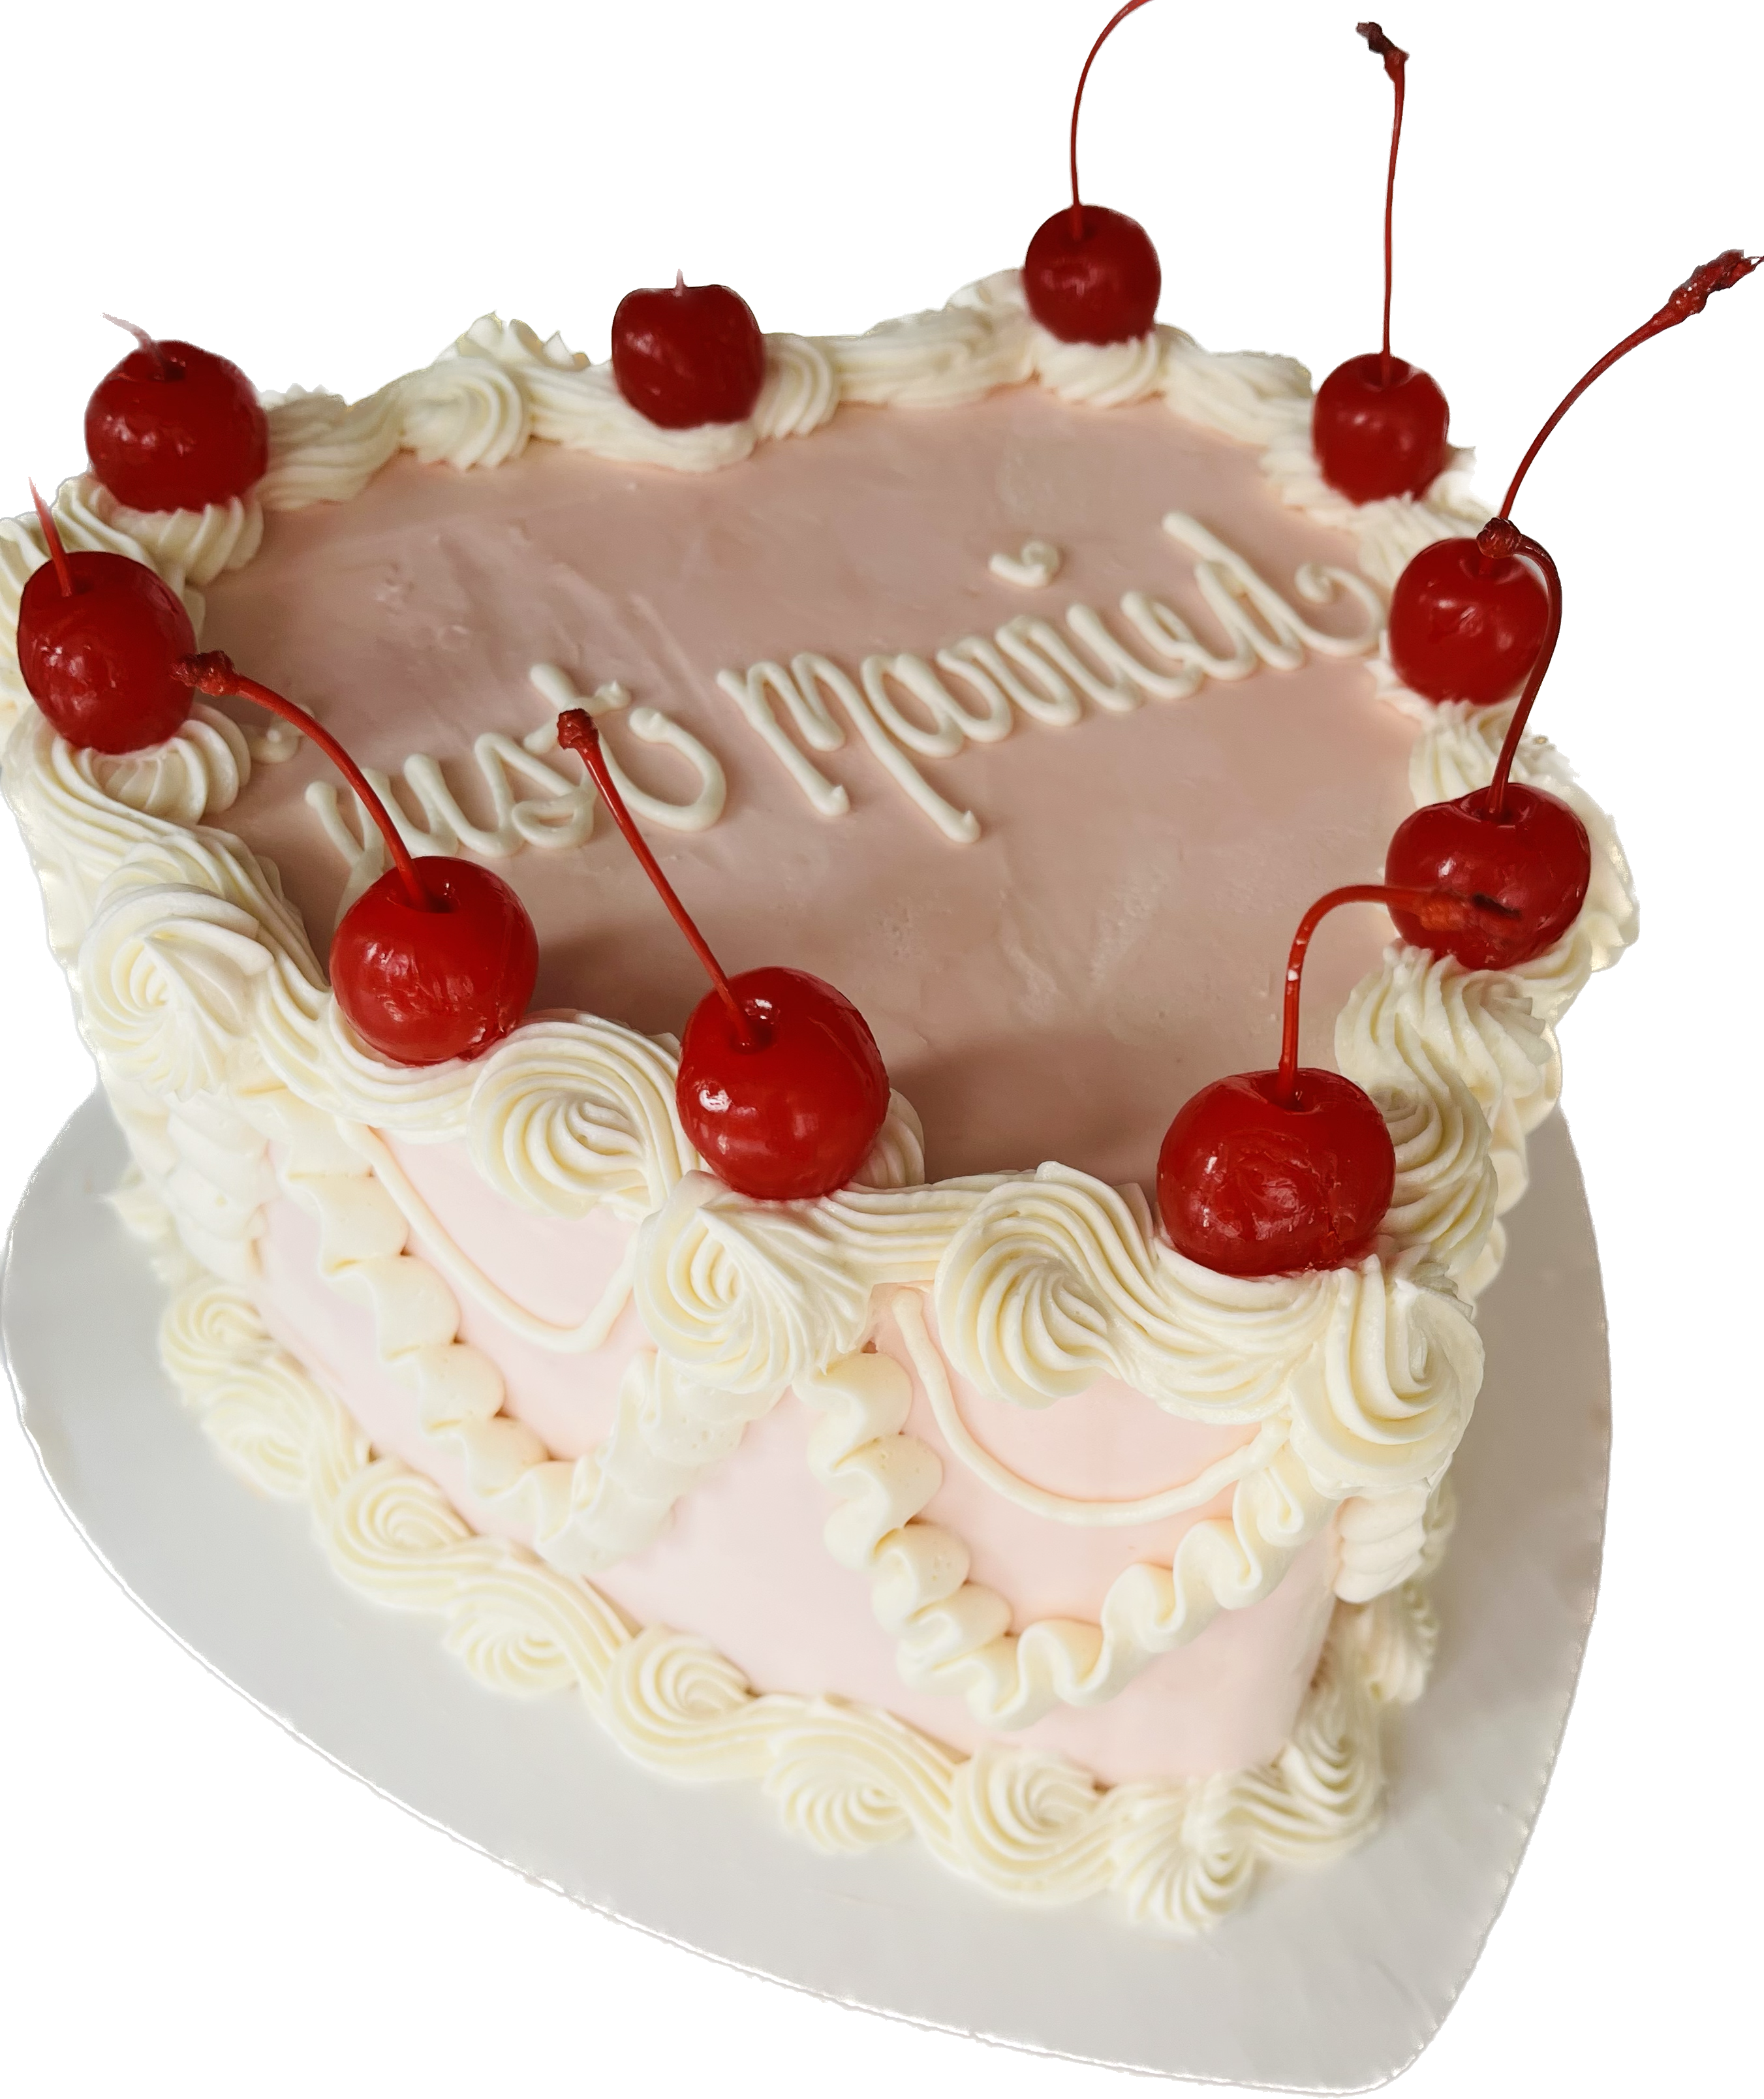 3-tier-Red-heart-shaped-wedding-cake-e1477872252389-375x500 - The Cakeway